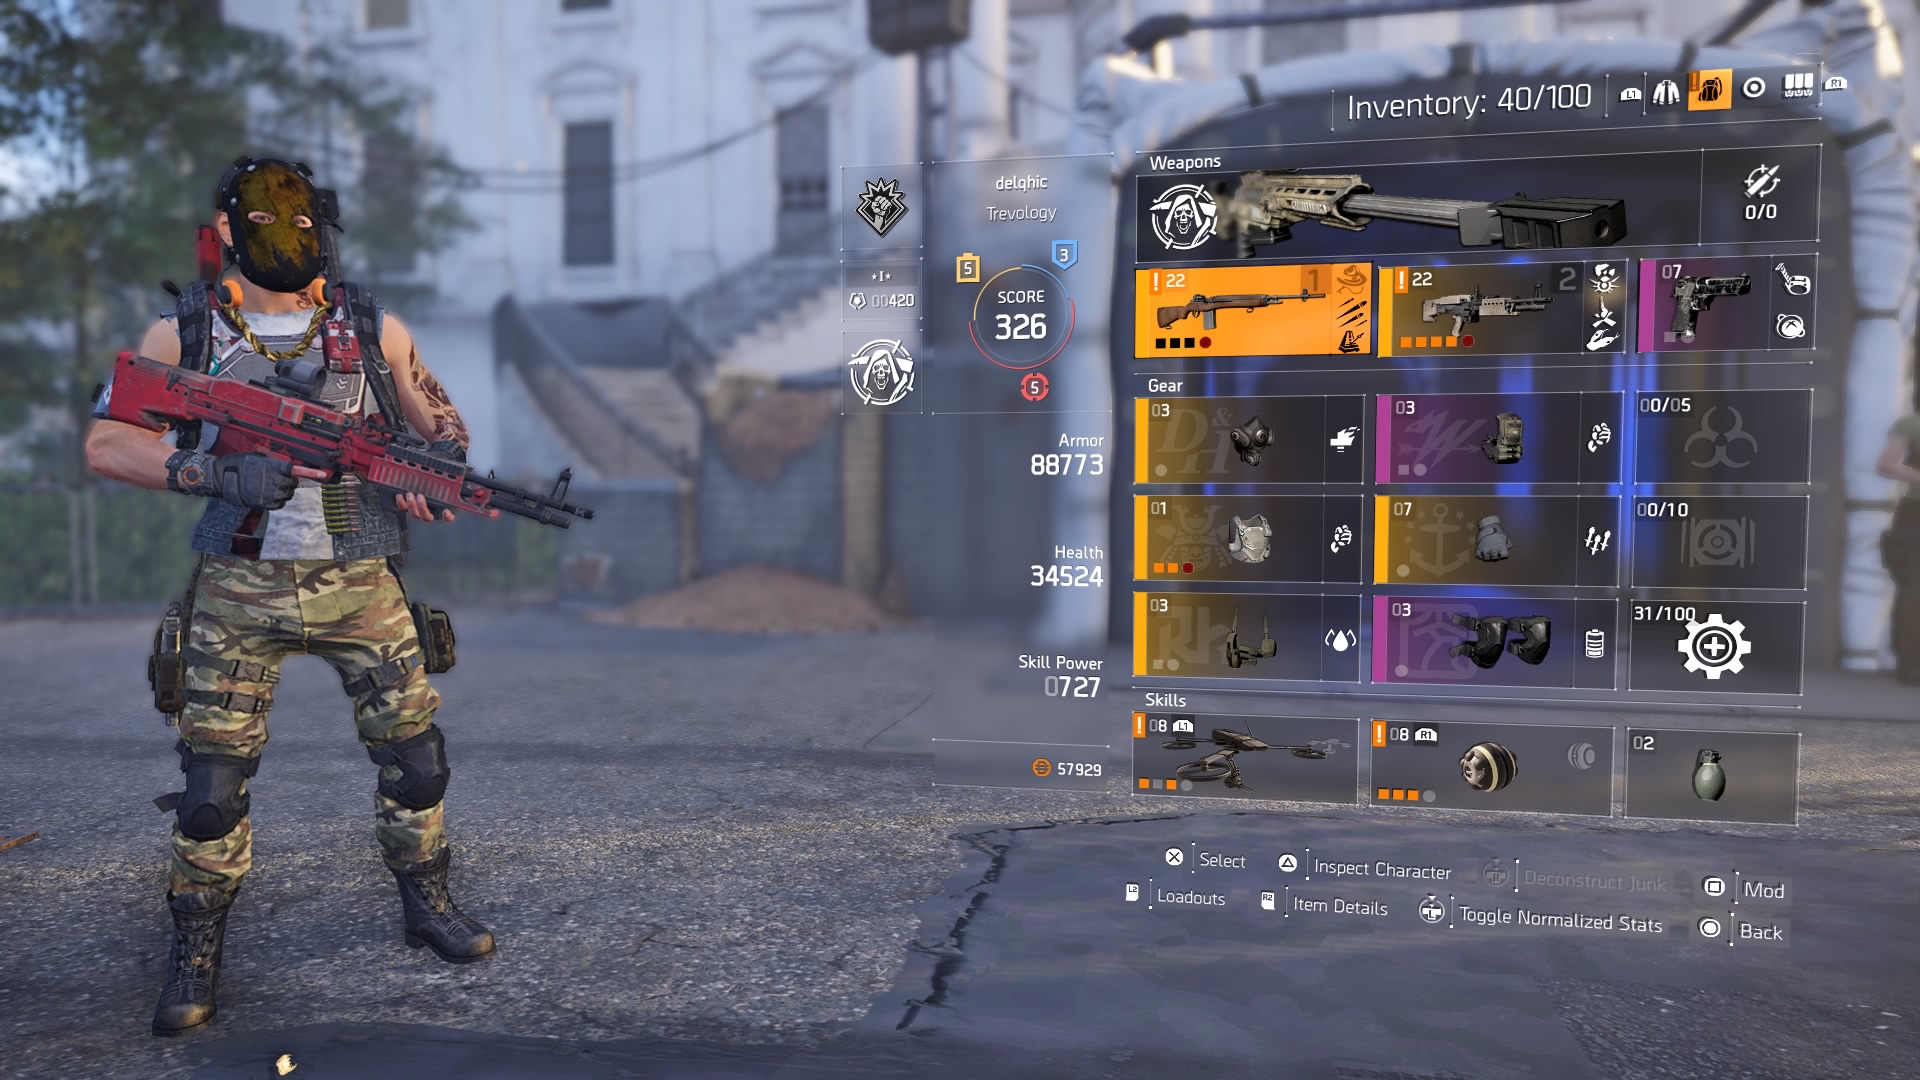 The Division 2 Endgame Explained Gear Score Invaded Missions Strongholds Bounties And More Gamesradar